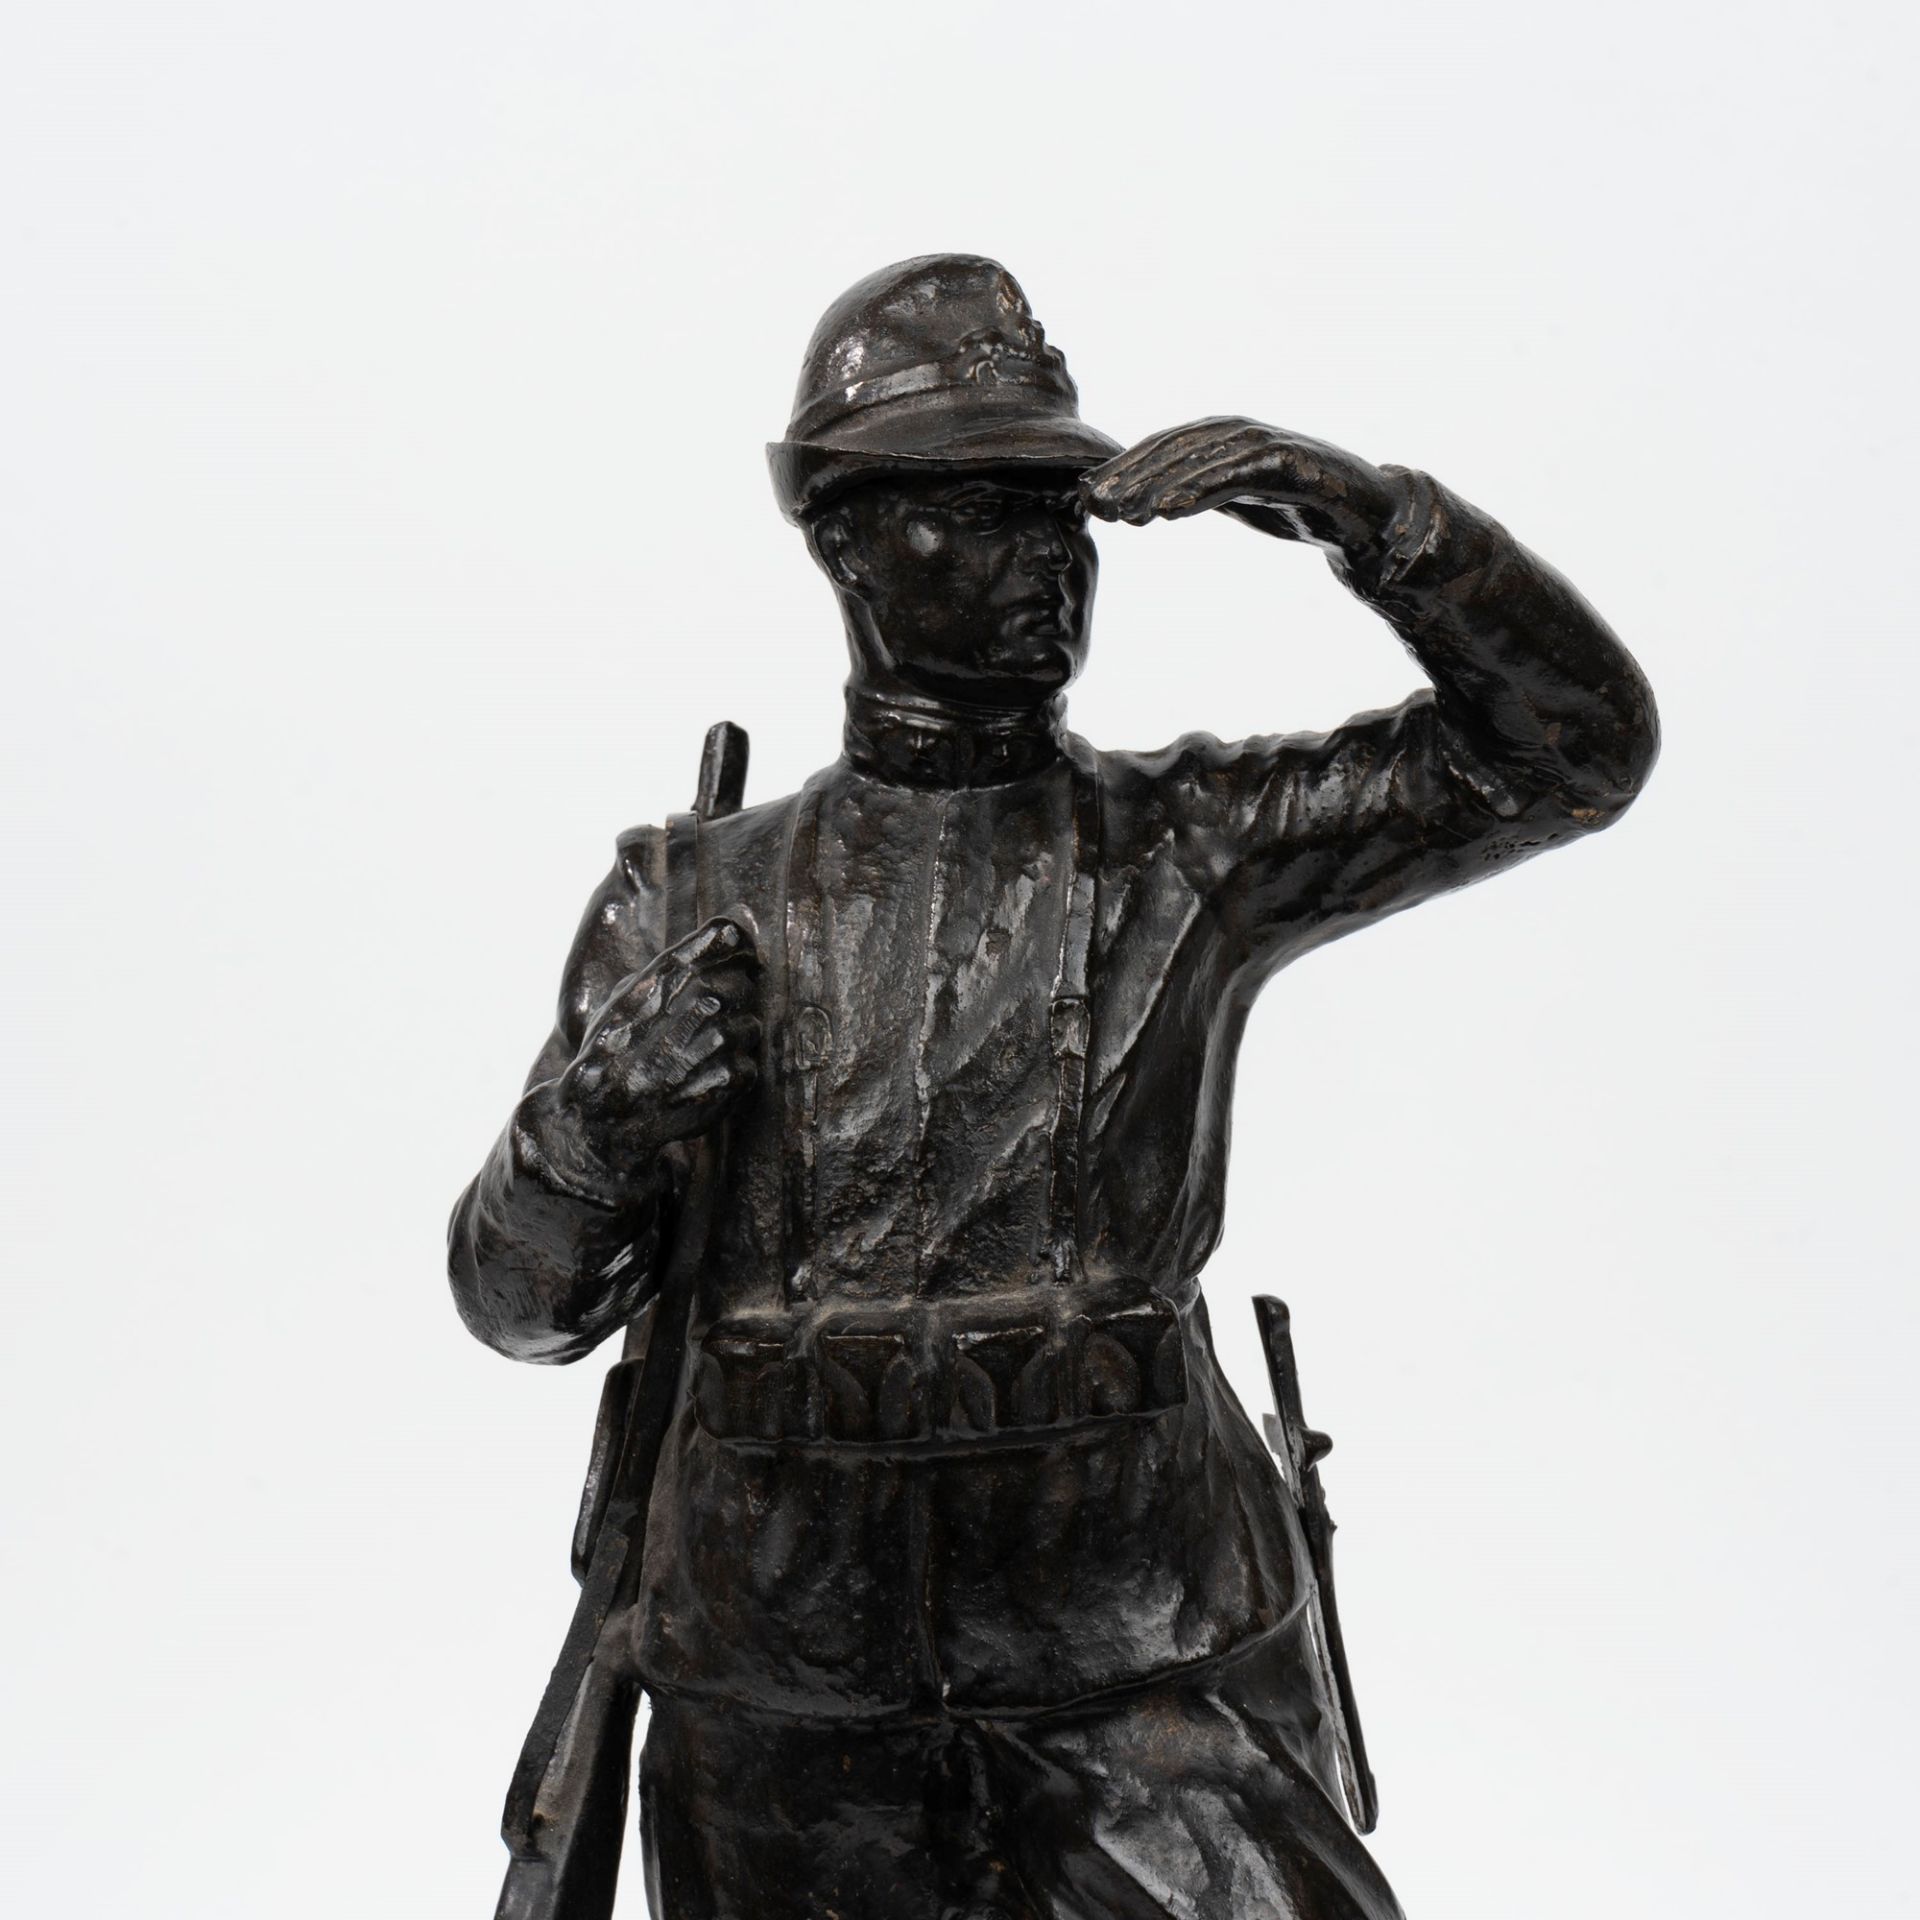 Dark patina bronze sculpture depicting a soldier from the Guardia di Finanza, early 20th century - Image 2 of 5